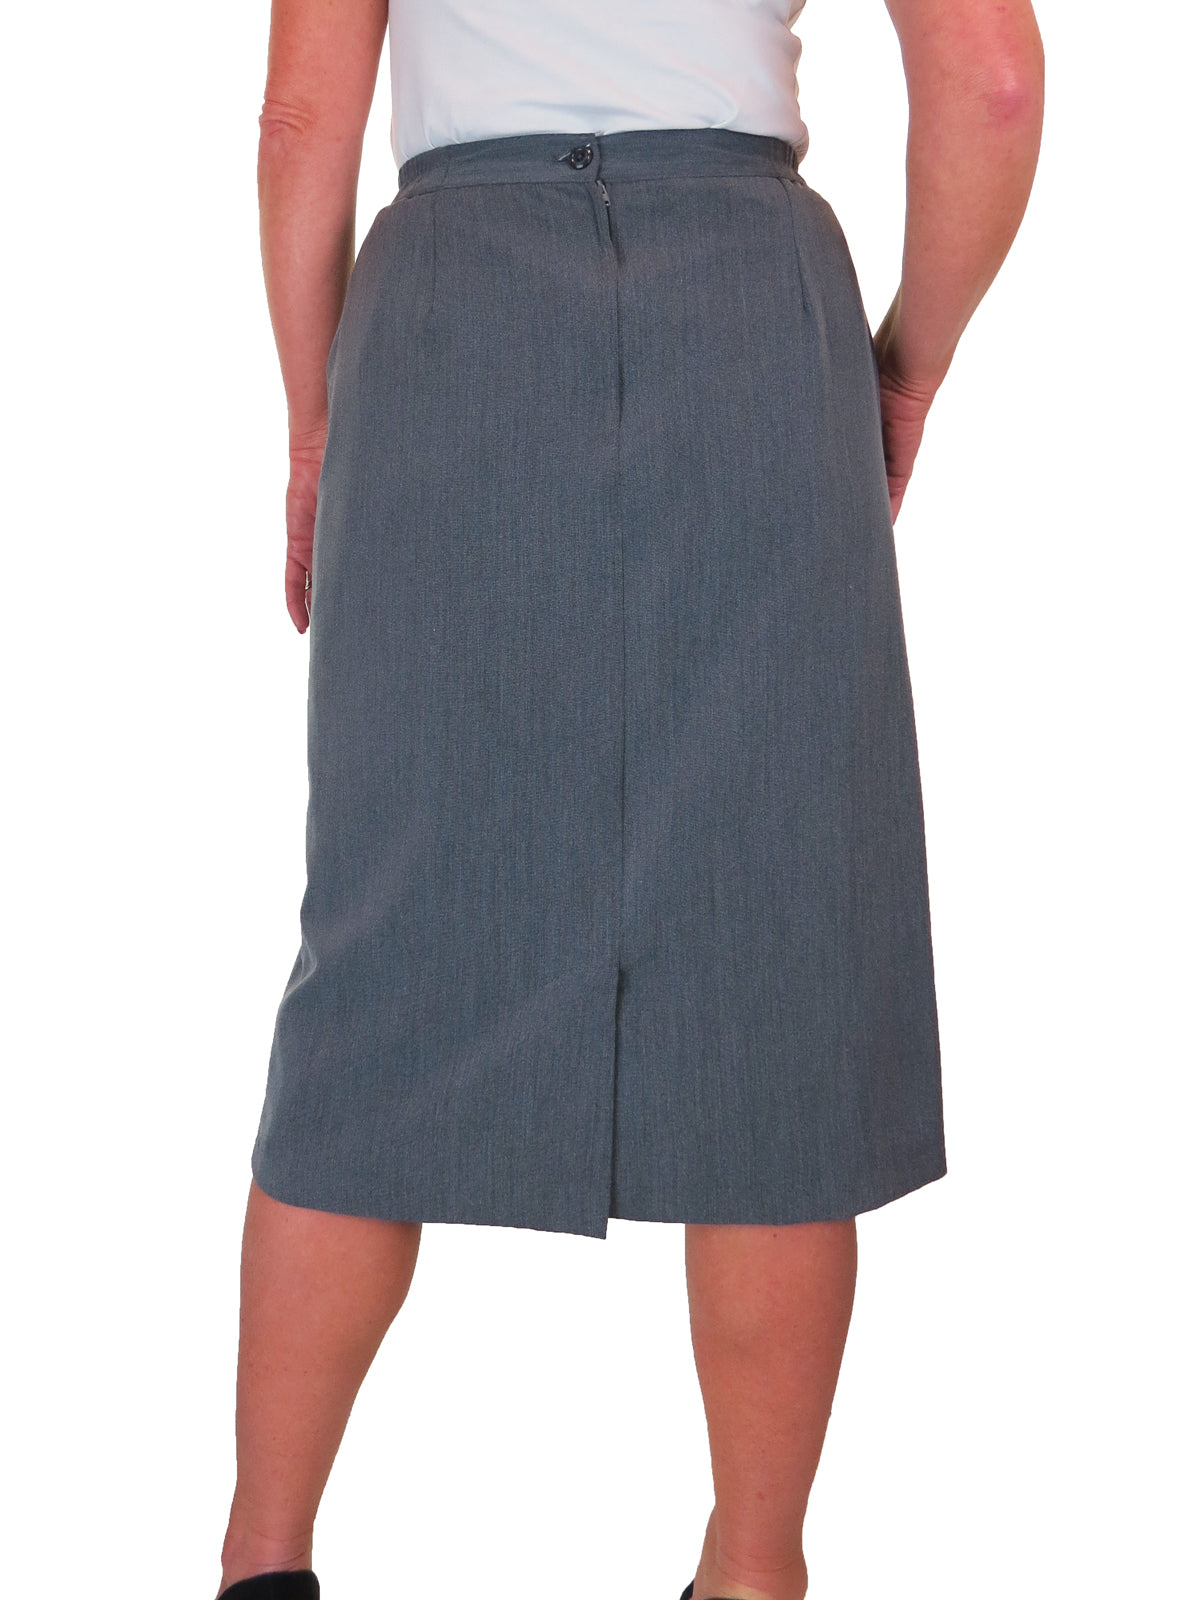 Fully Lined Smart Pencil Skirt With Elastic Waist Marl Grey